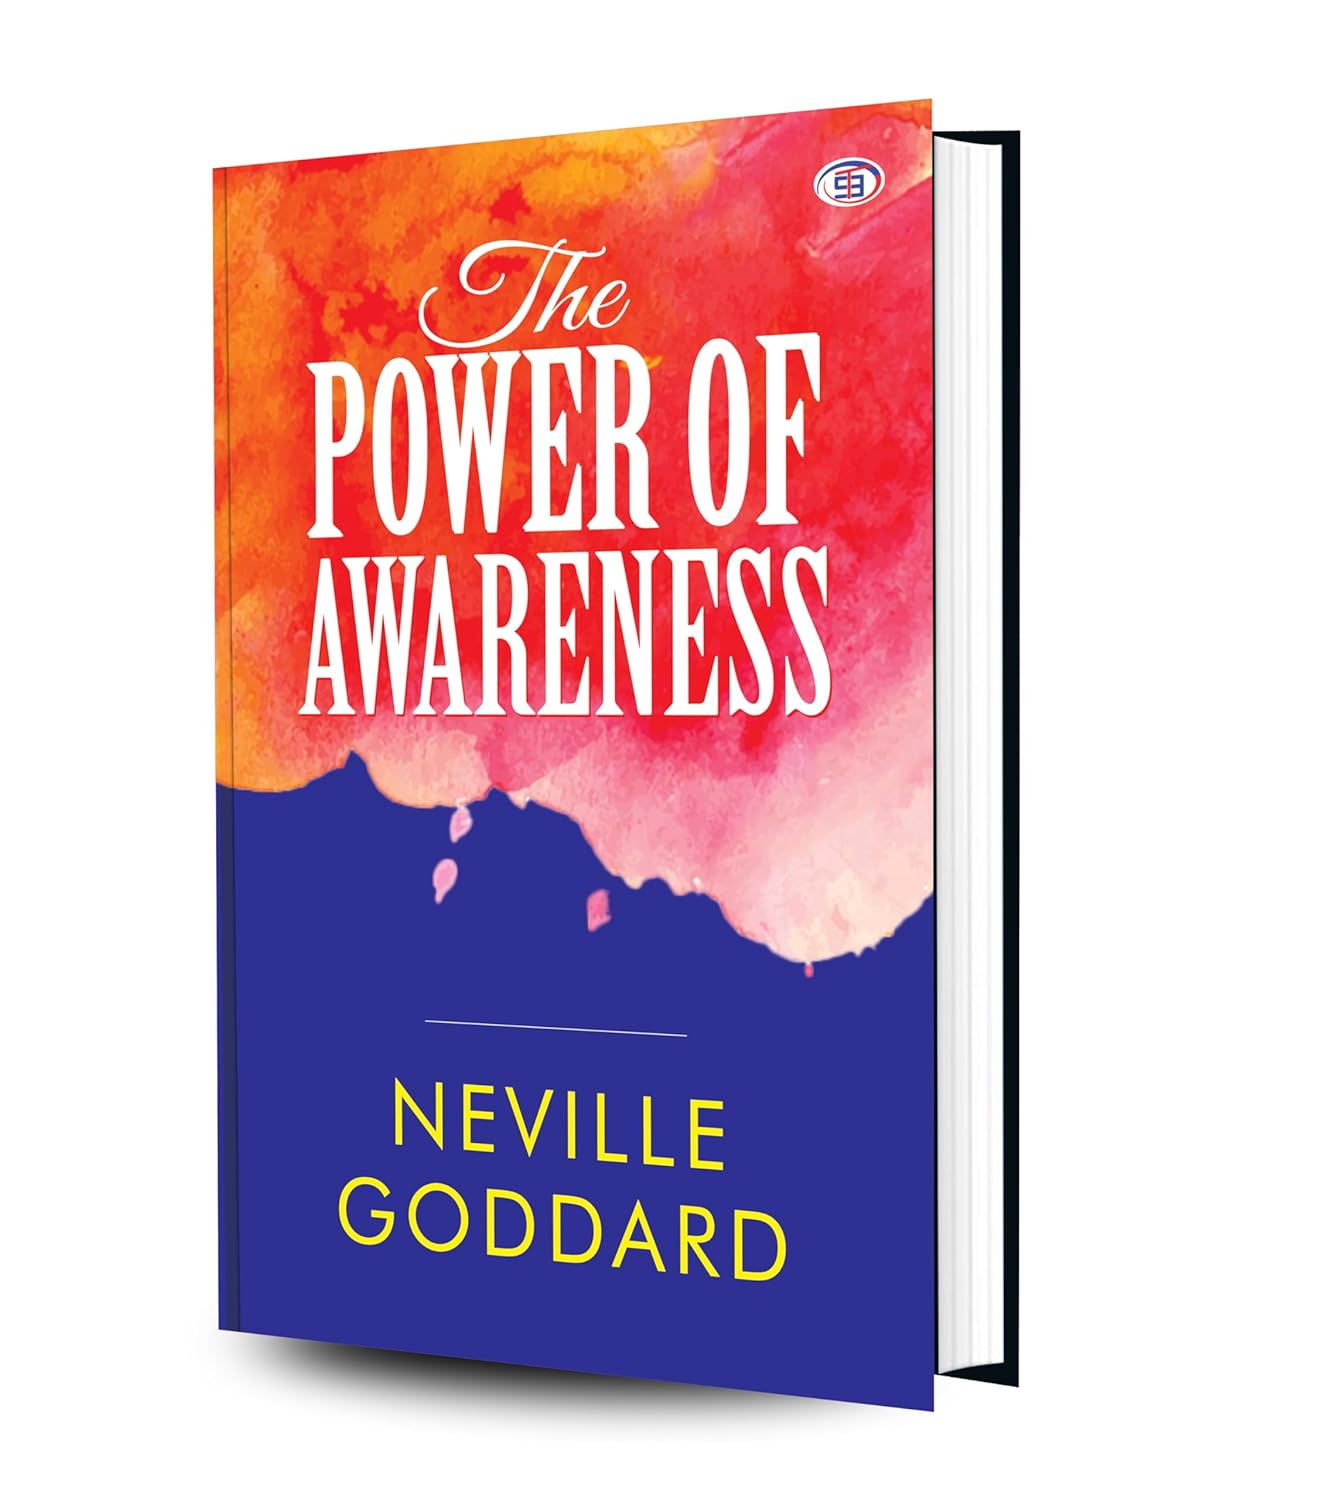 The Power of Awareness (Hardcover Library Edition)